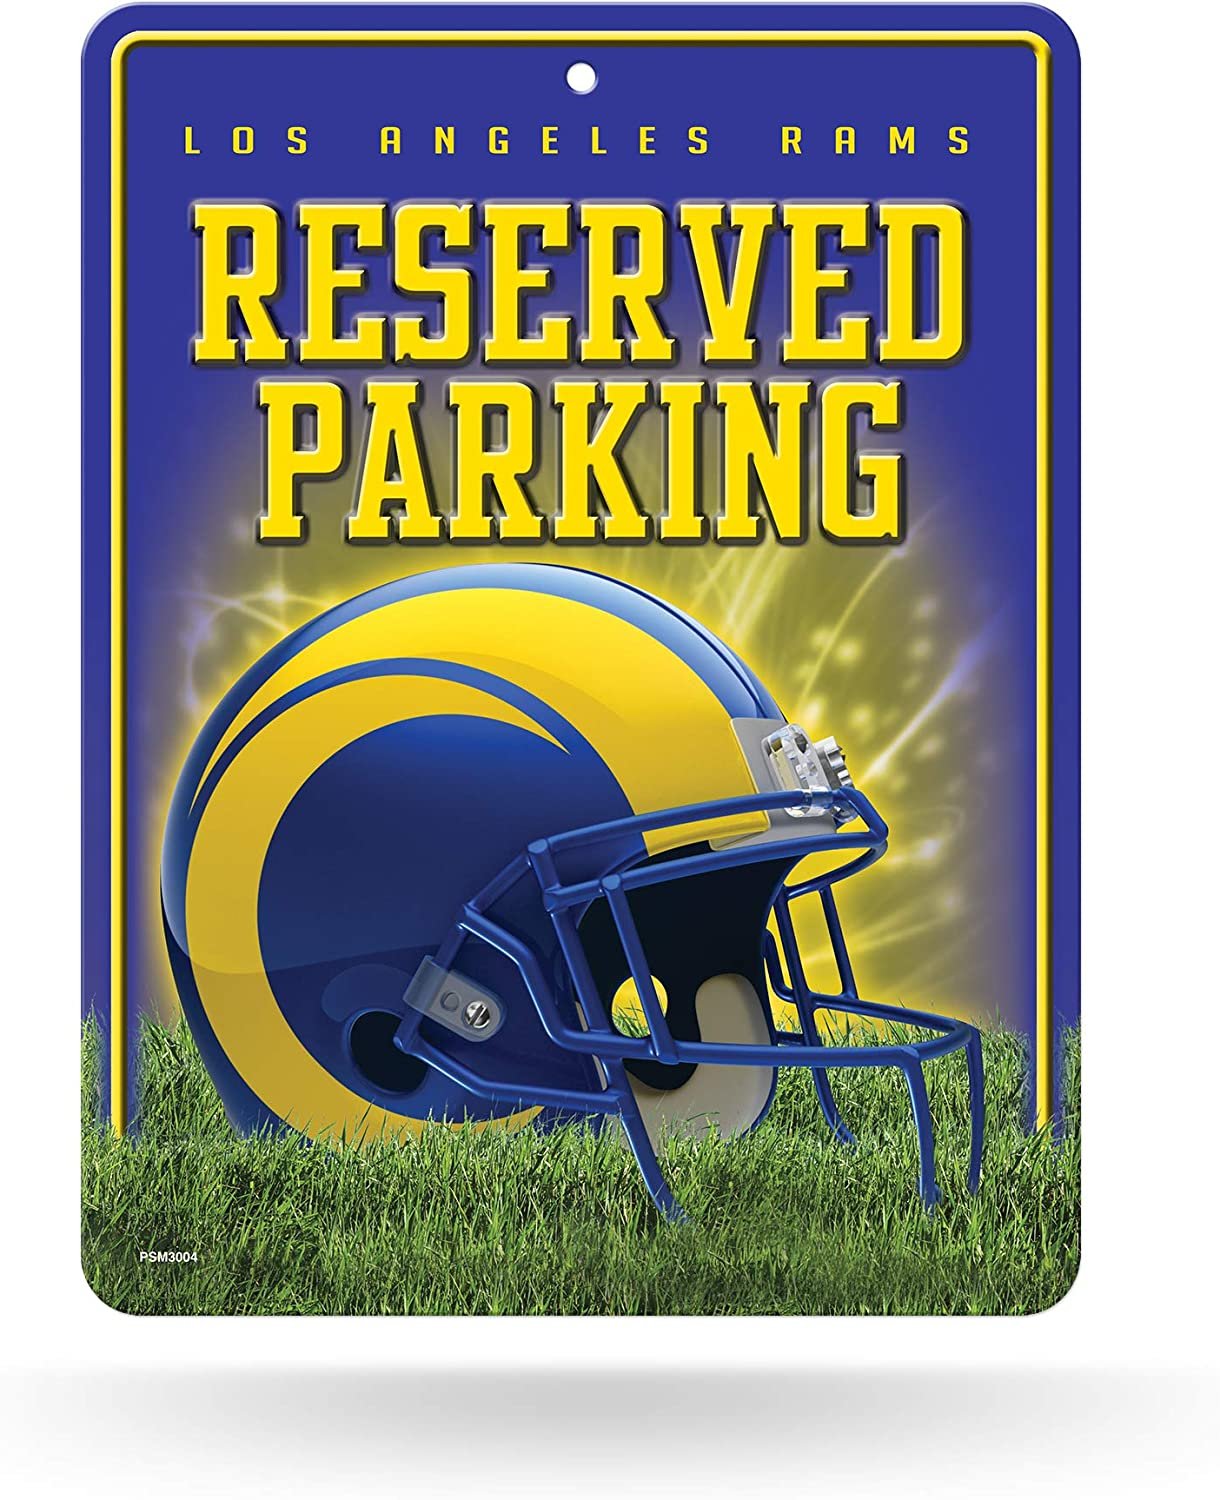 Los Angeles Rams Metal Parking Sign Novelty Wall 8.5 x 11 Inch